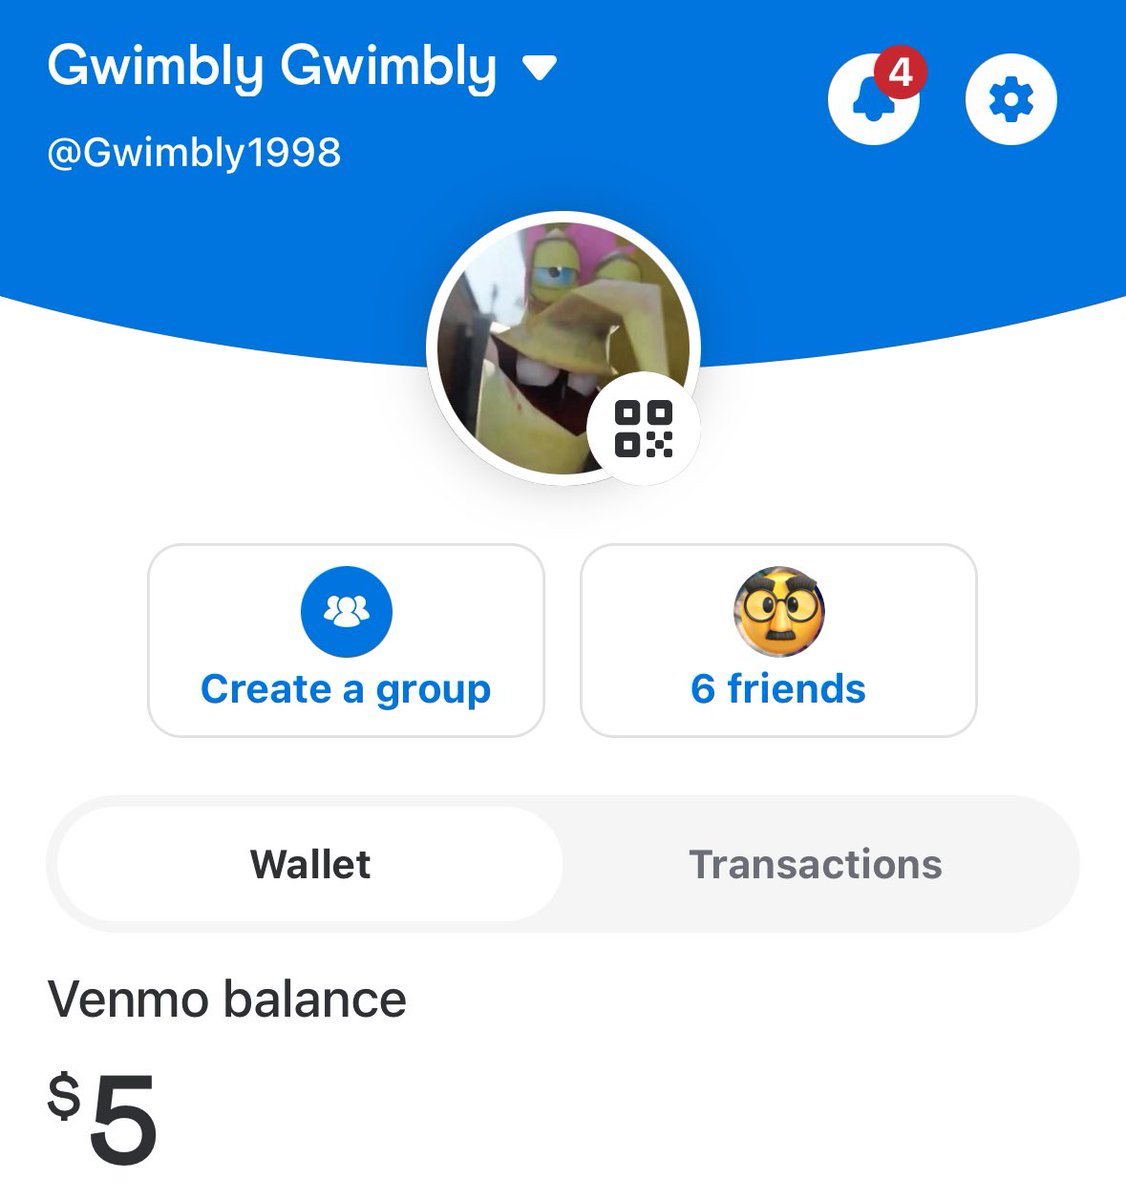 OMG SOMEONE TIPPED ME ON TOUR AND FORGOT I CHANGED IT TO GWIMBLY